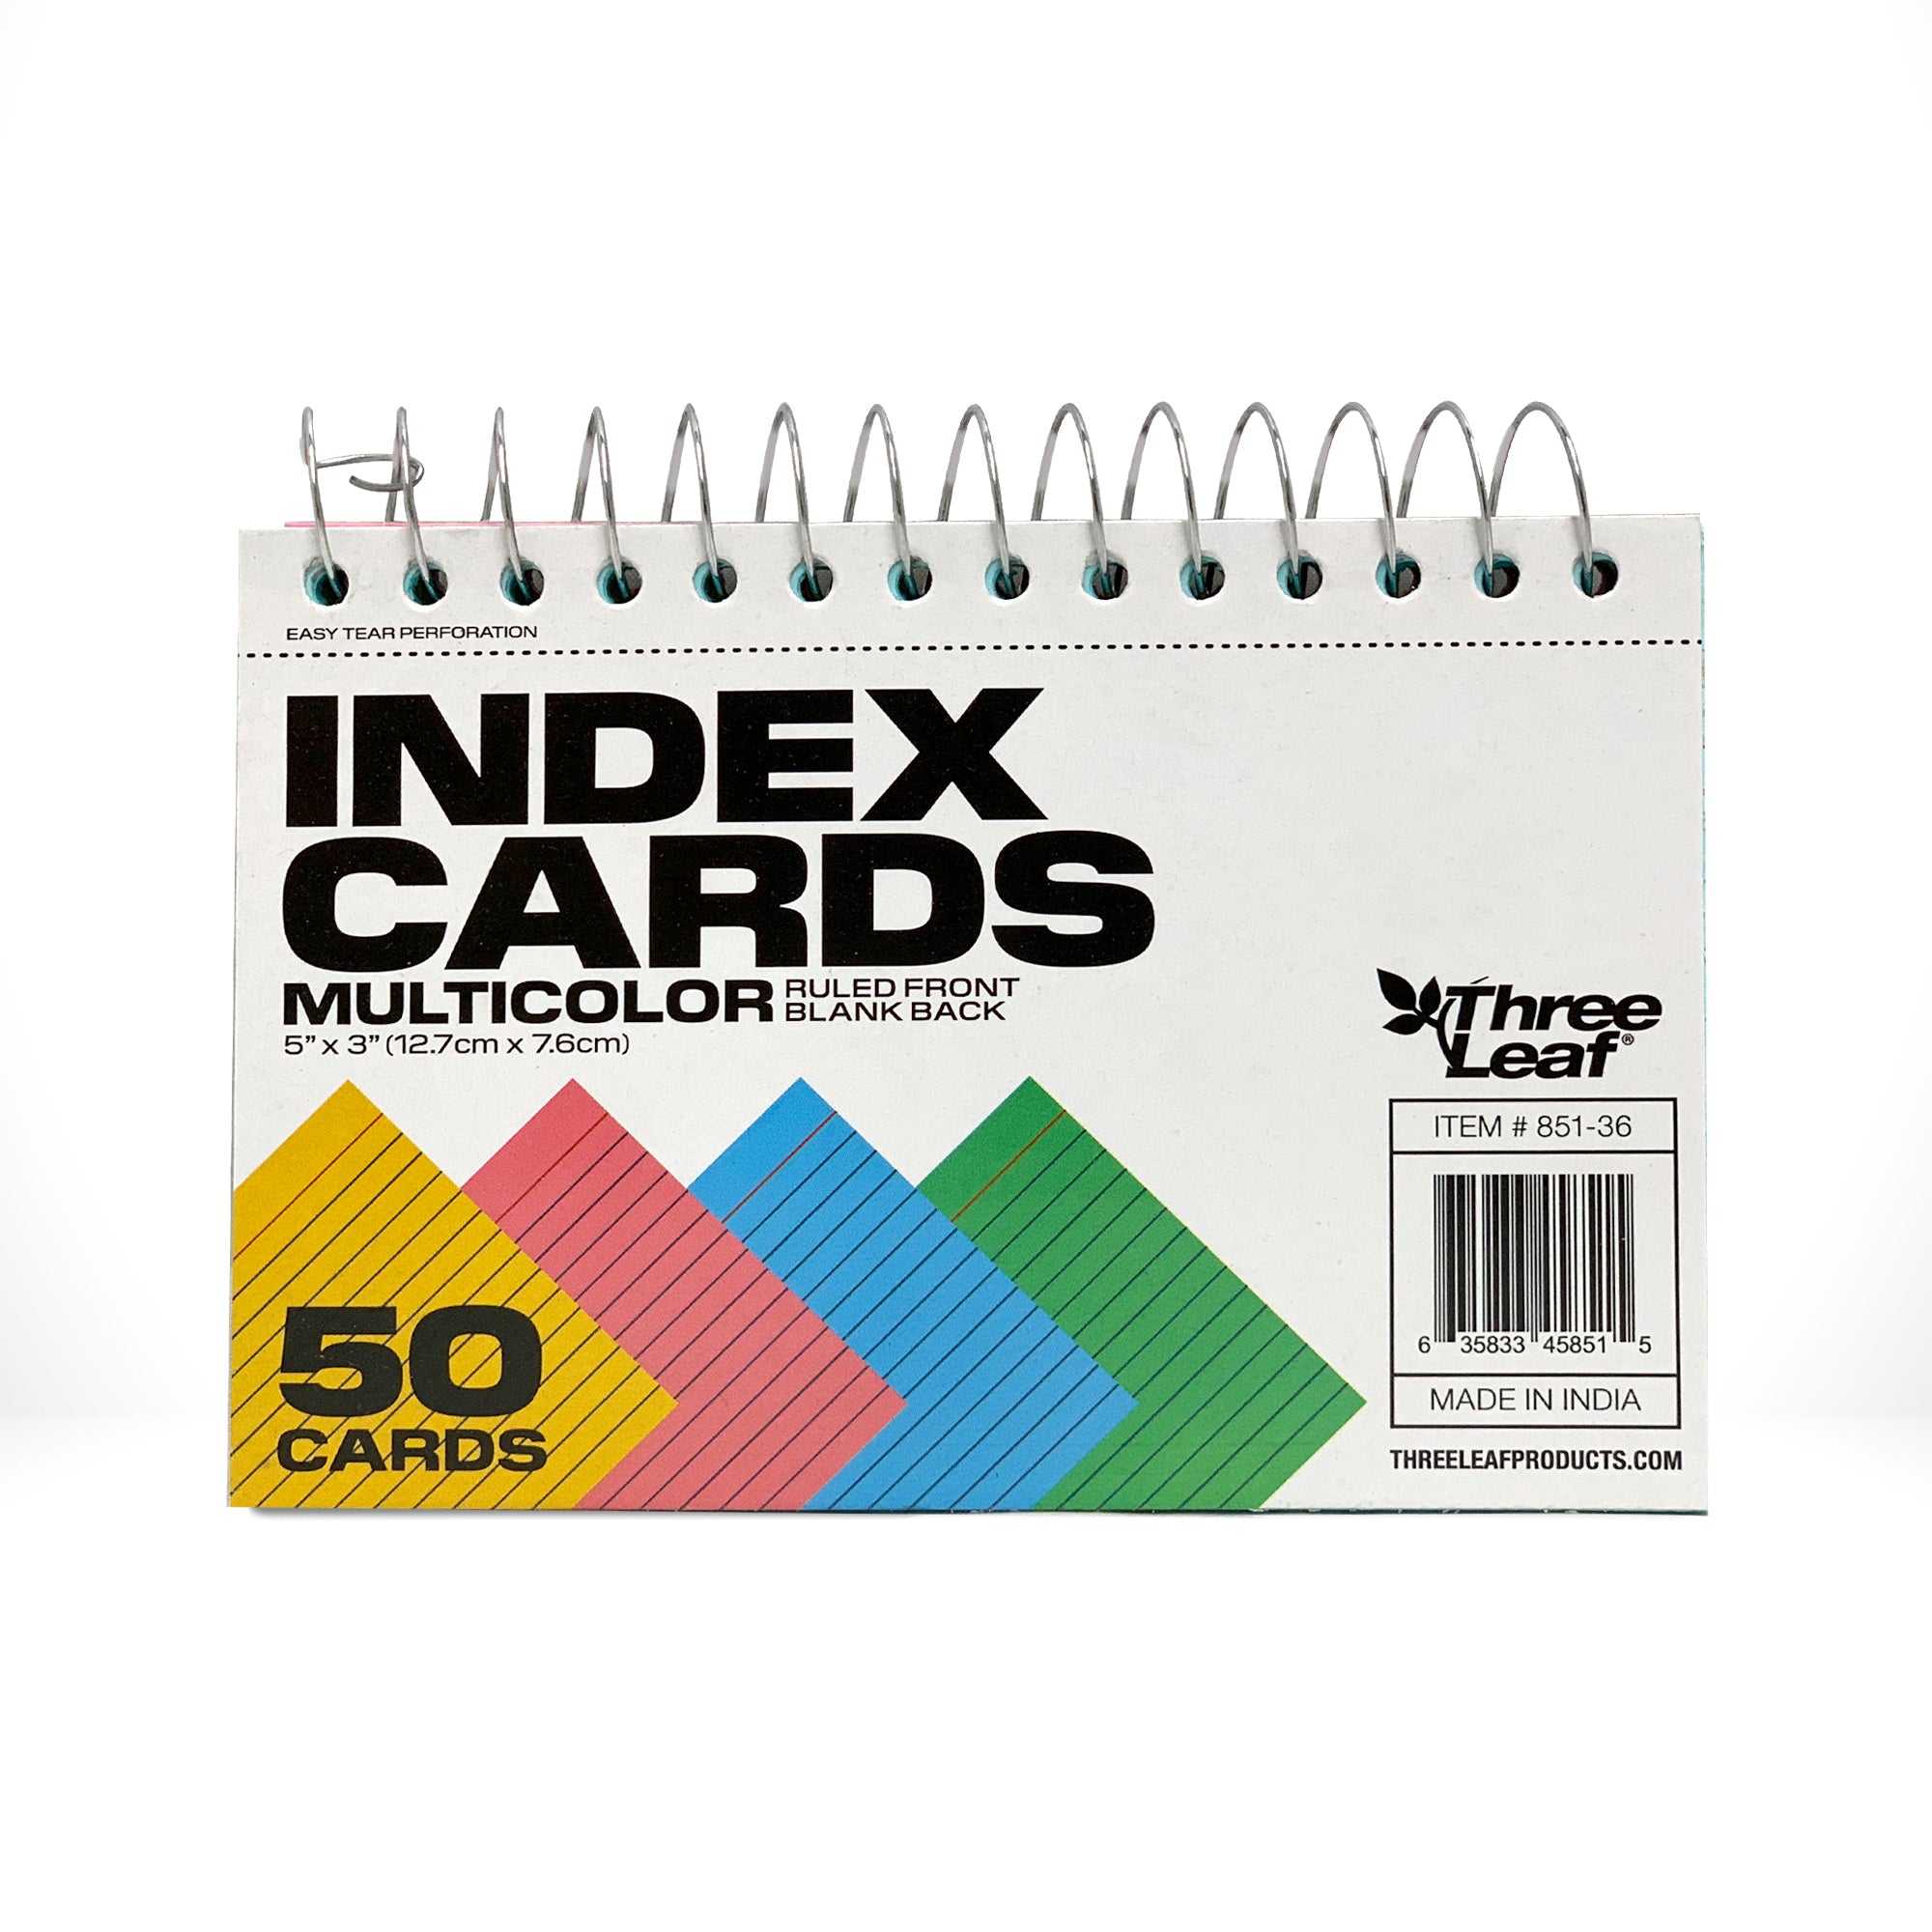 Set of 3 colored index cards 125 cards per package .Total 375